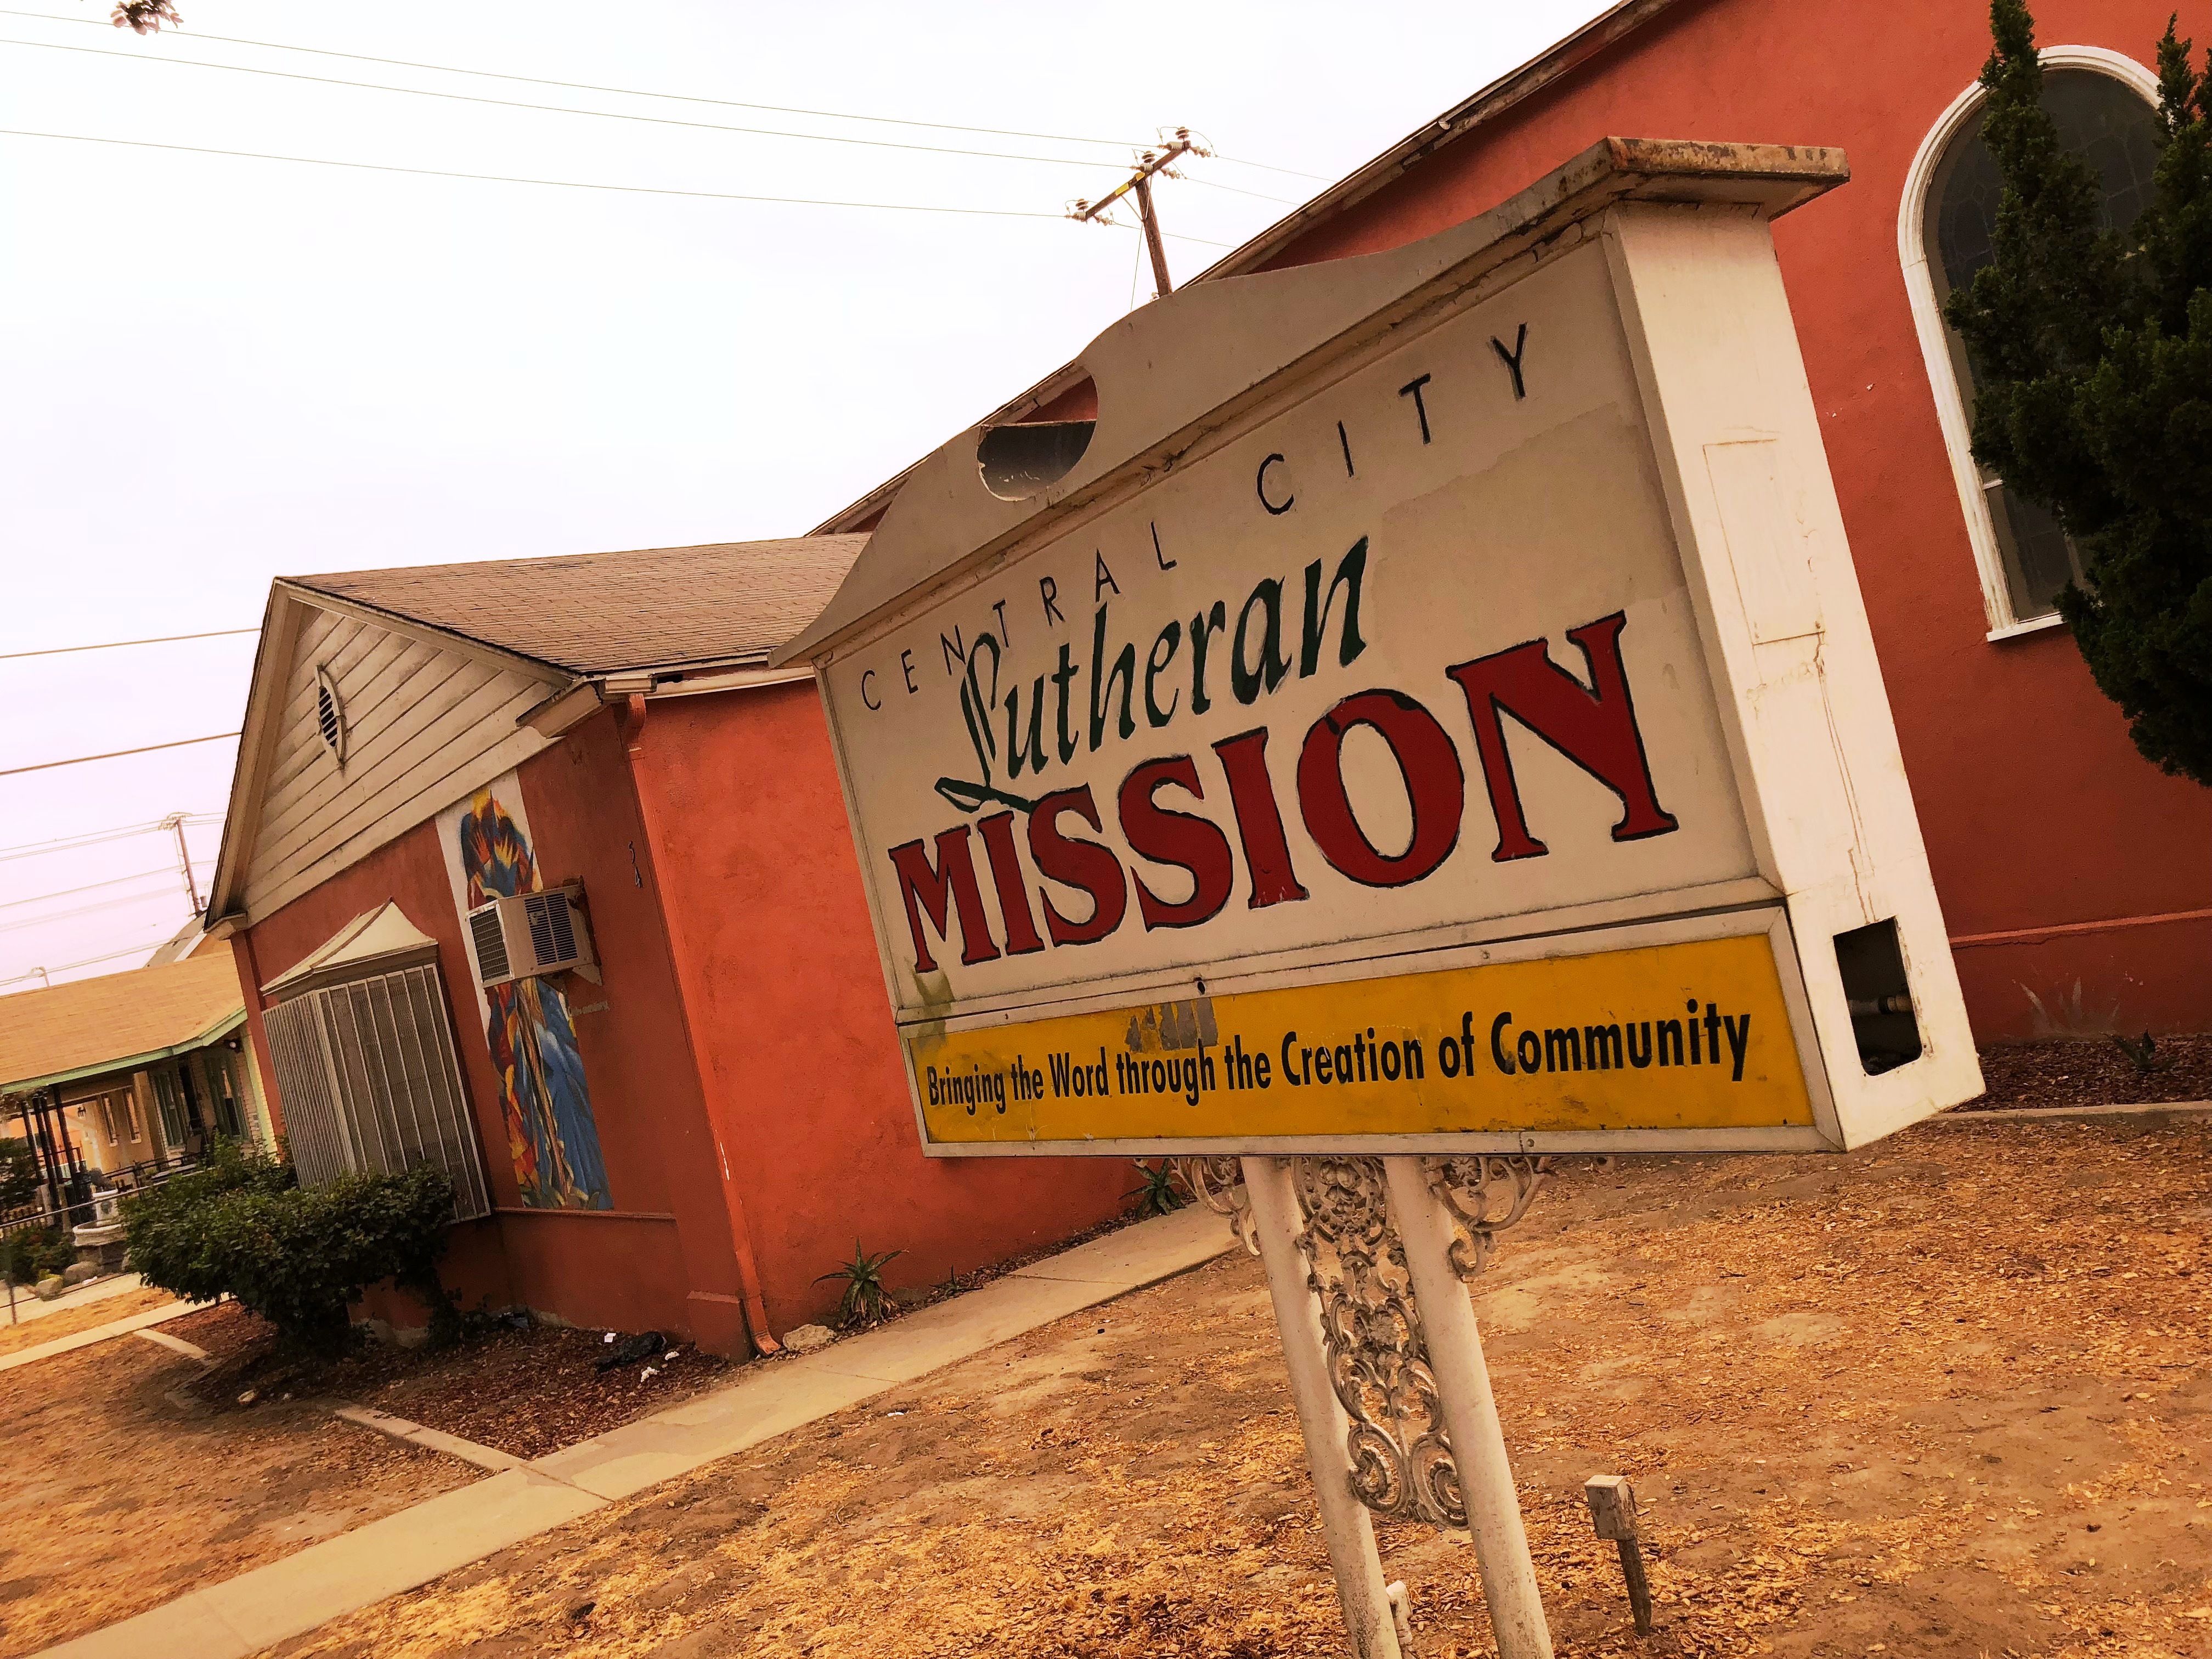 Transitional Housing and Emergency Shelter at Central City Lutheran Mission